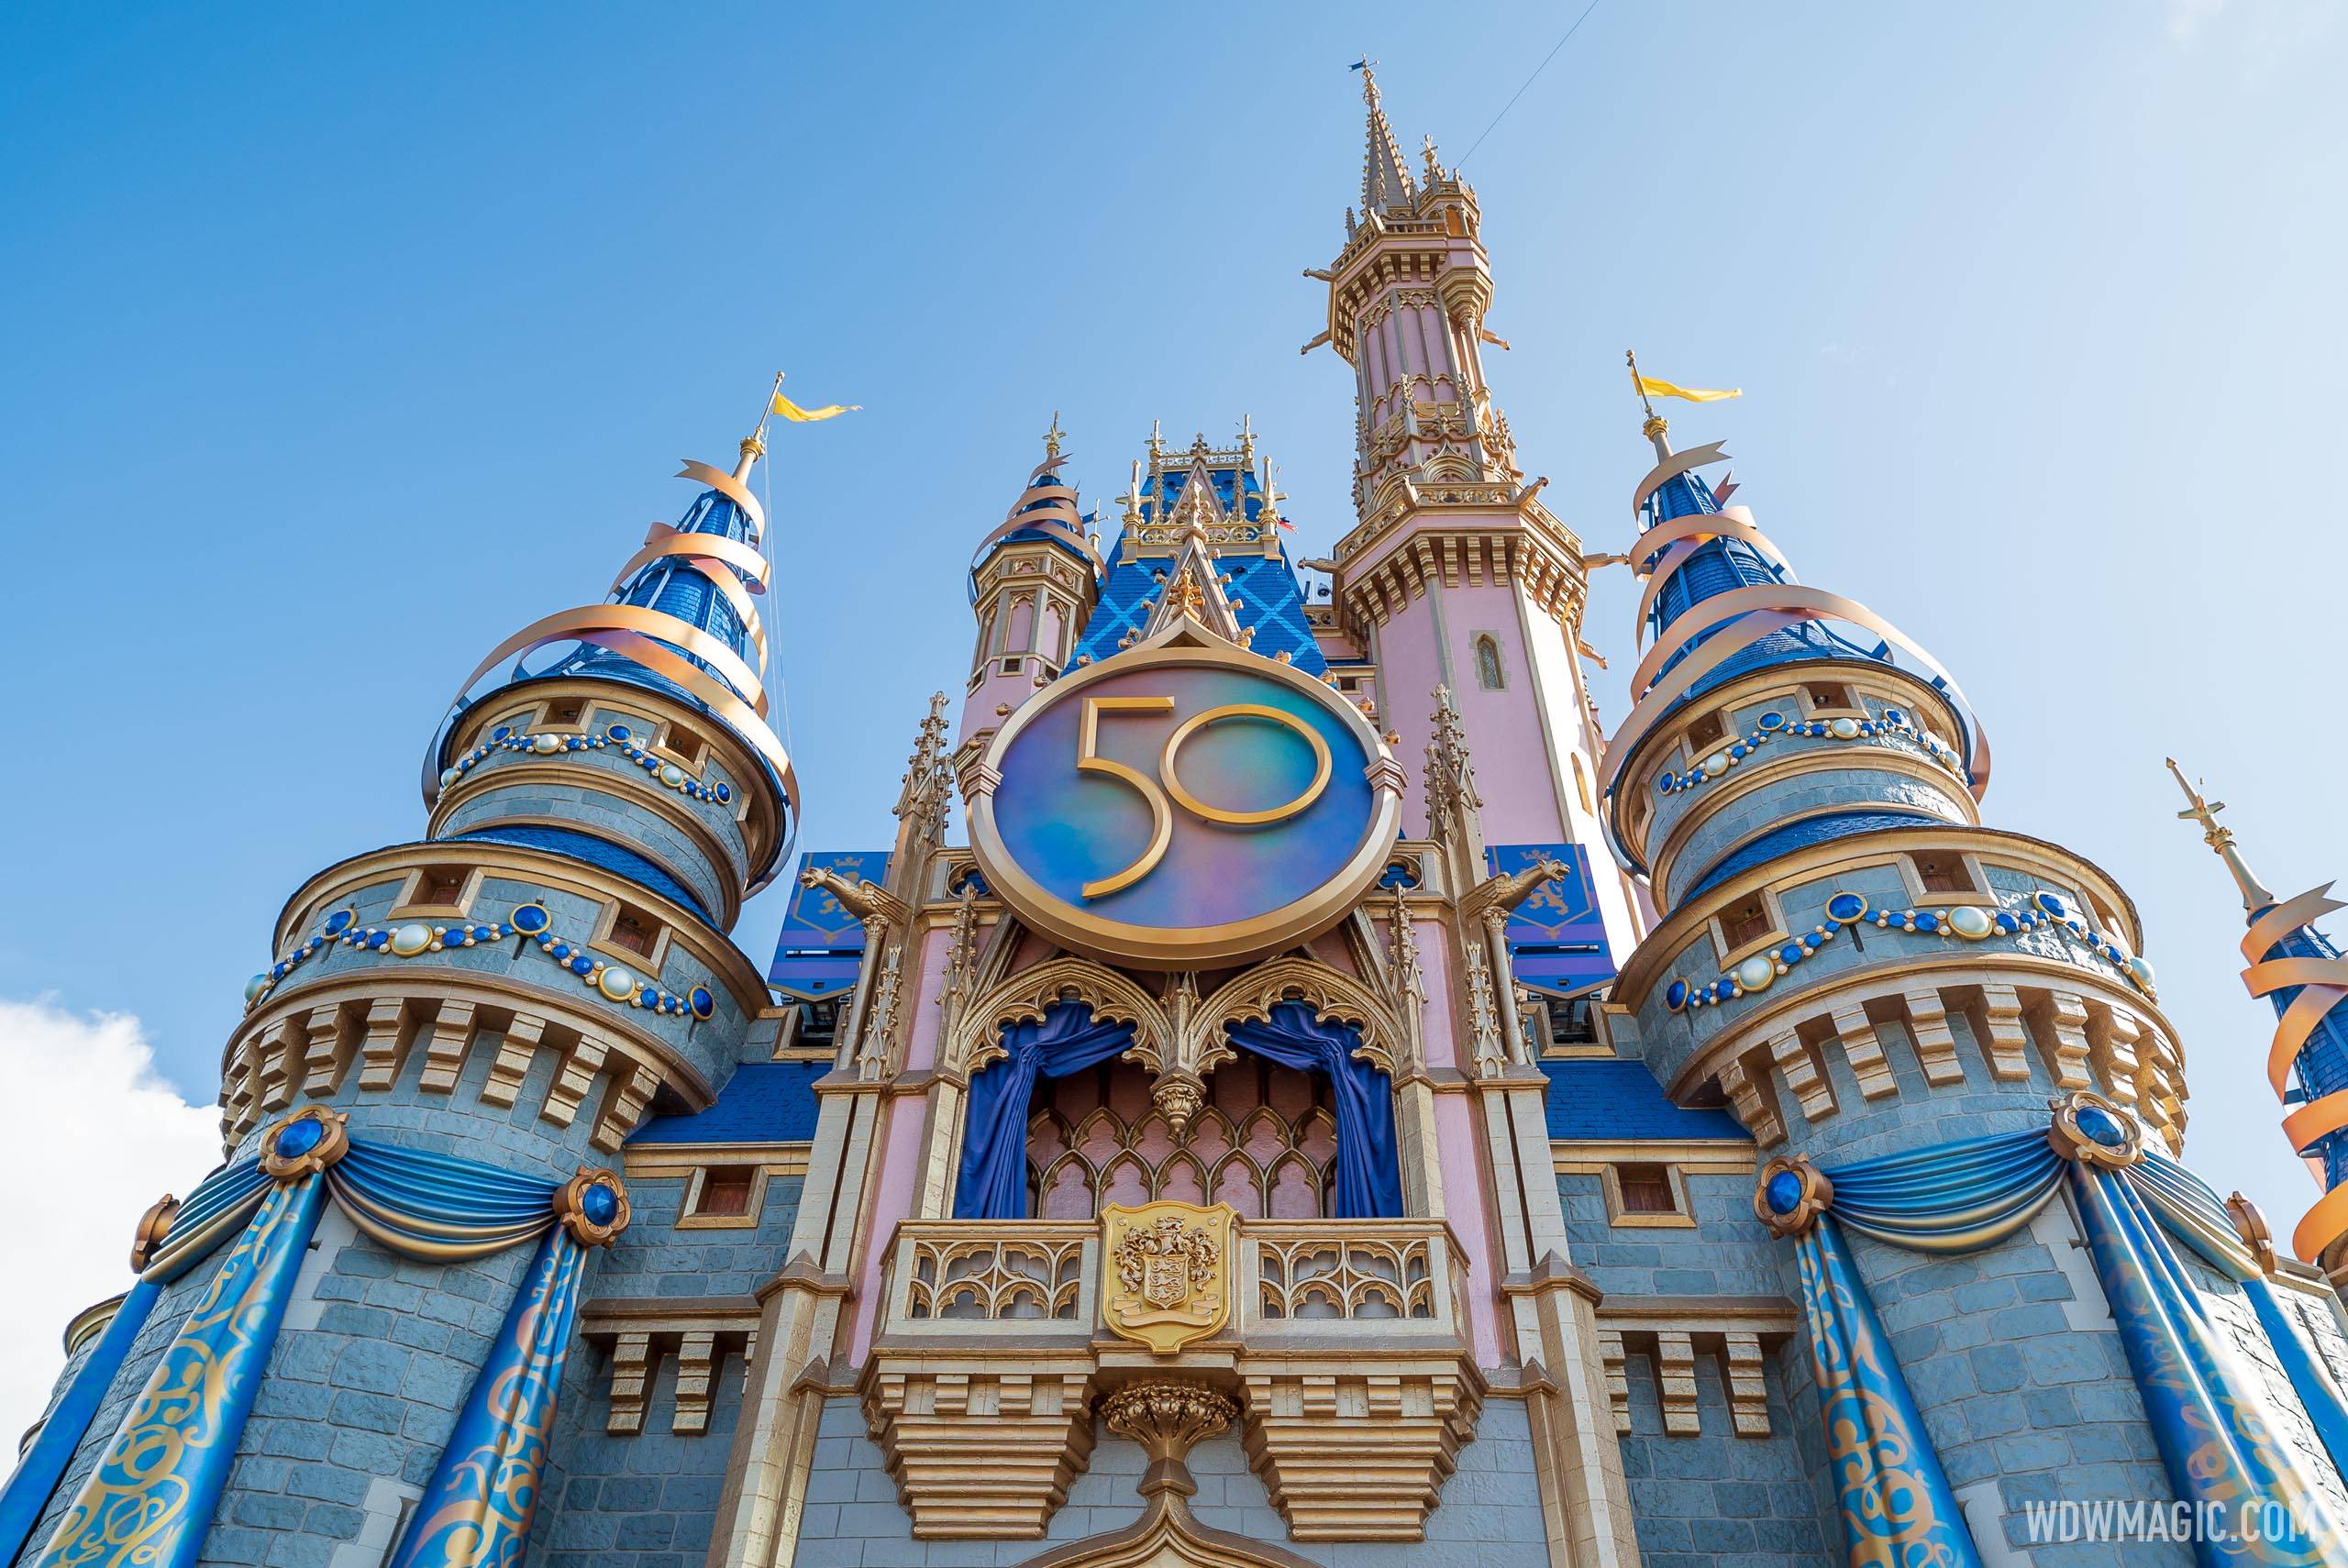 50th crest added to Cinderella Castle